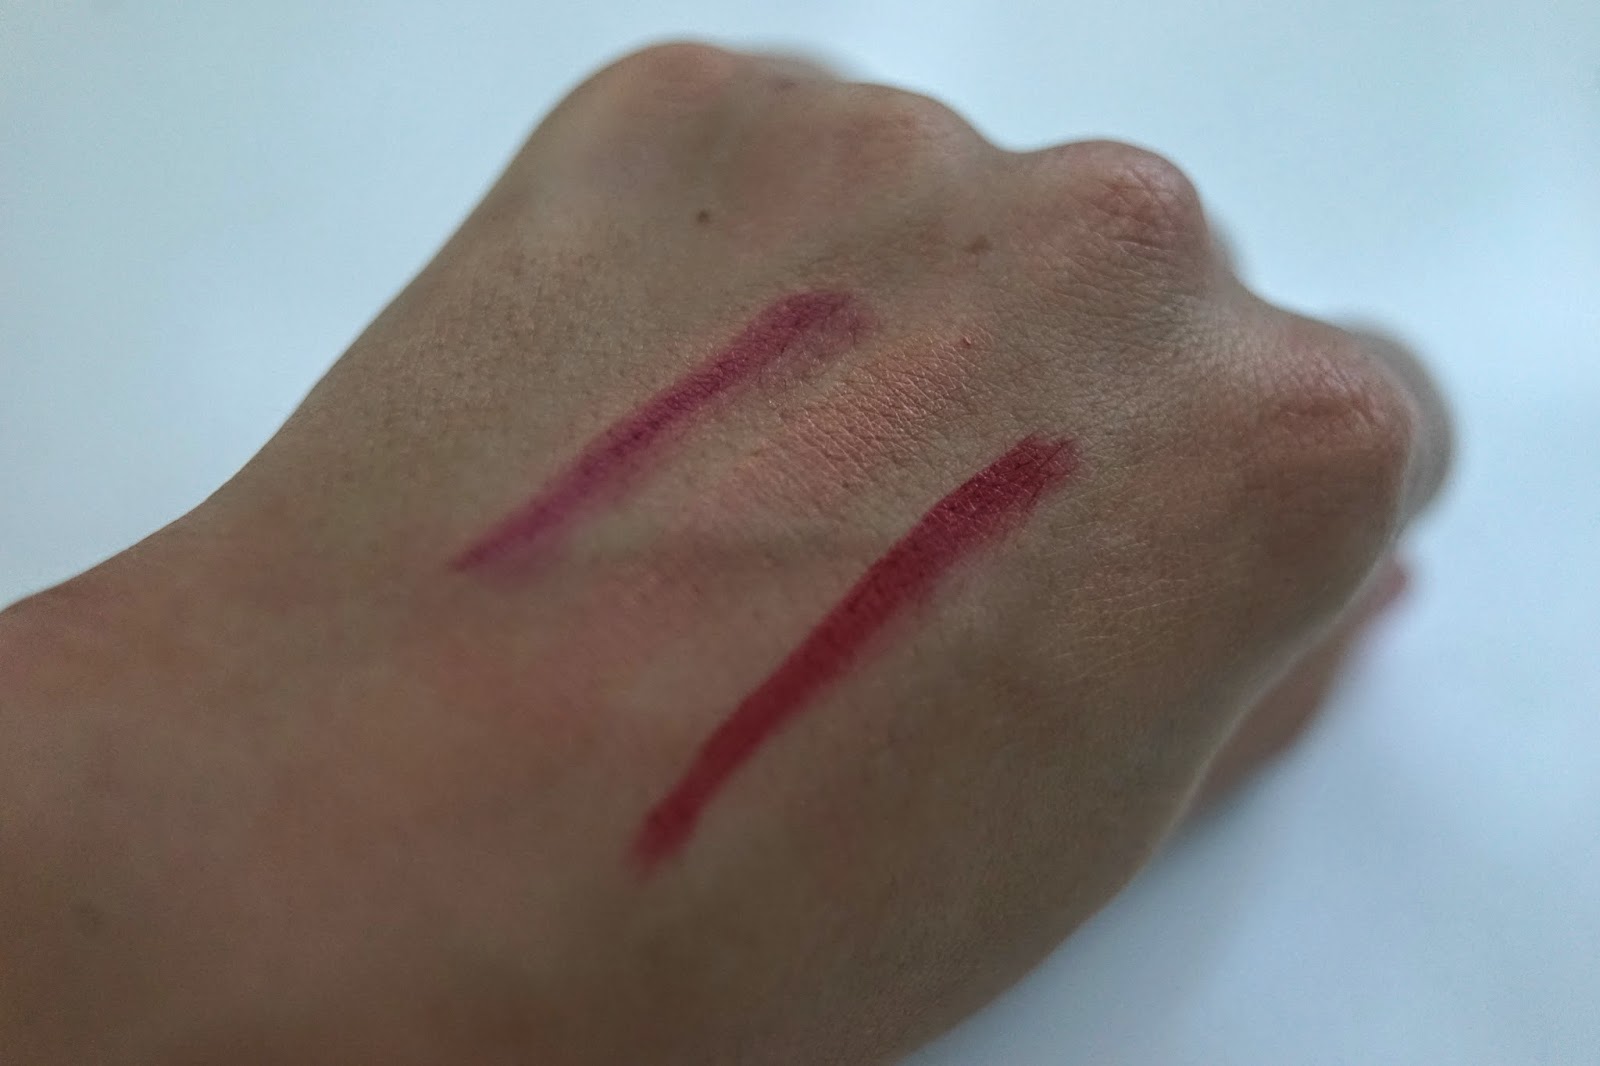 burberry kisses swatches